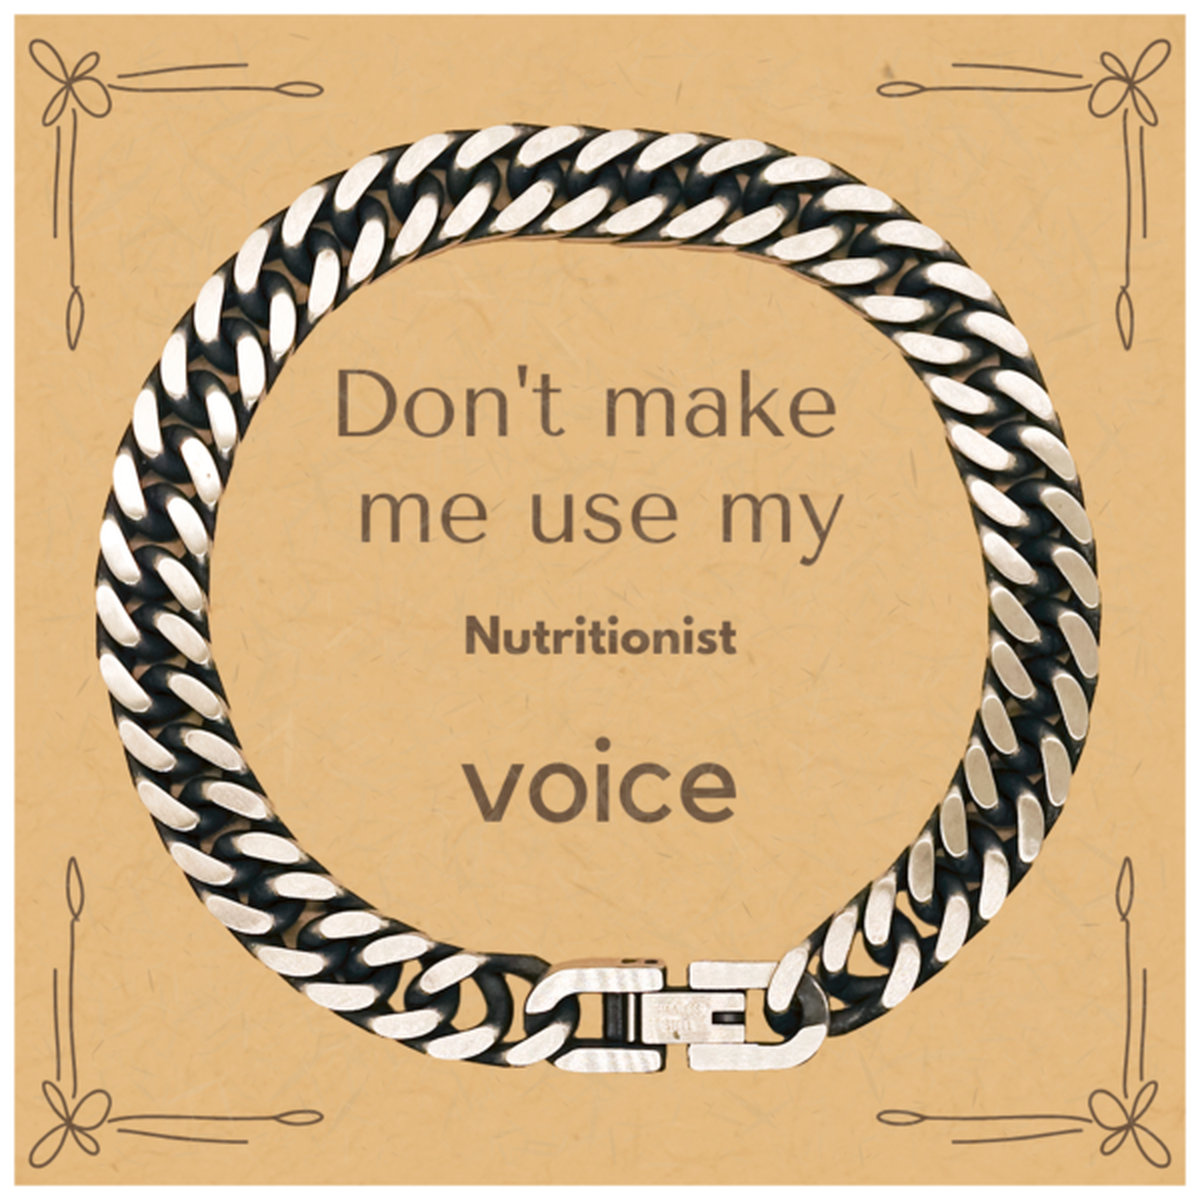 Don't make me use my Nutritionist voice, Sarcasm Nutritionist Card Gifts, Christmas Nutritionist Cuban Link Chain Bracelet Birthday Unique Gifts For Nutritionist Coworkers, Men, Women, Colleague, Friends